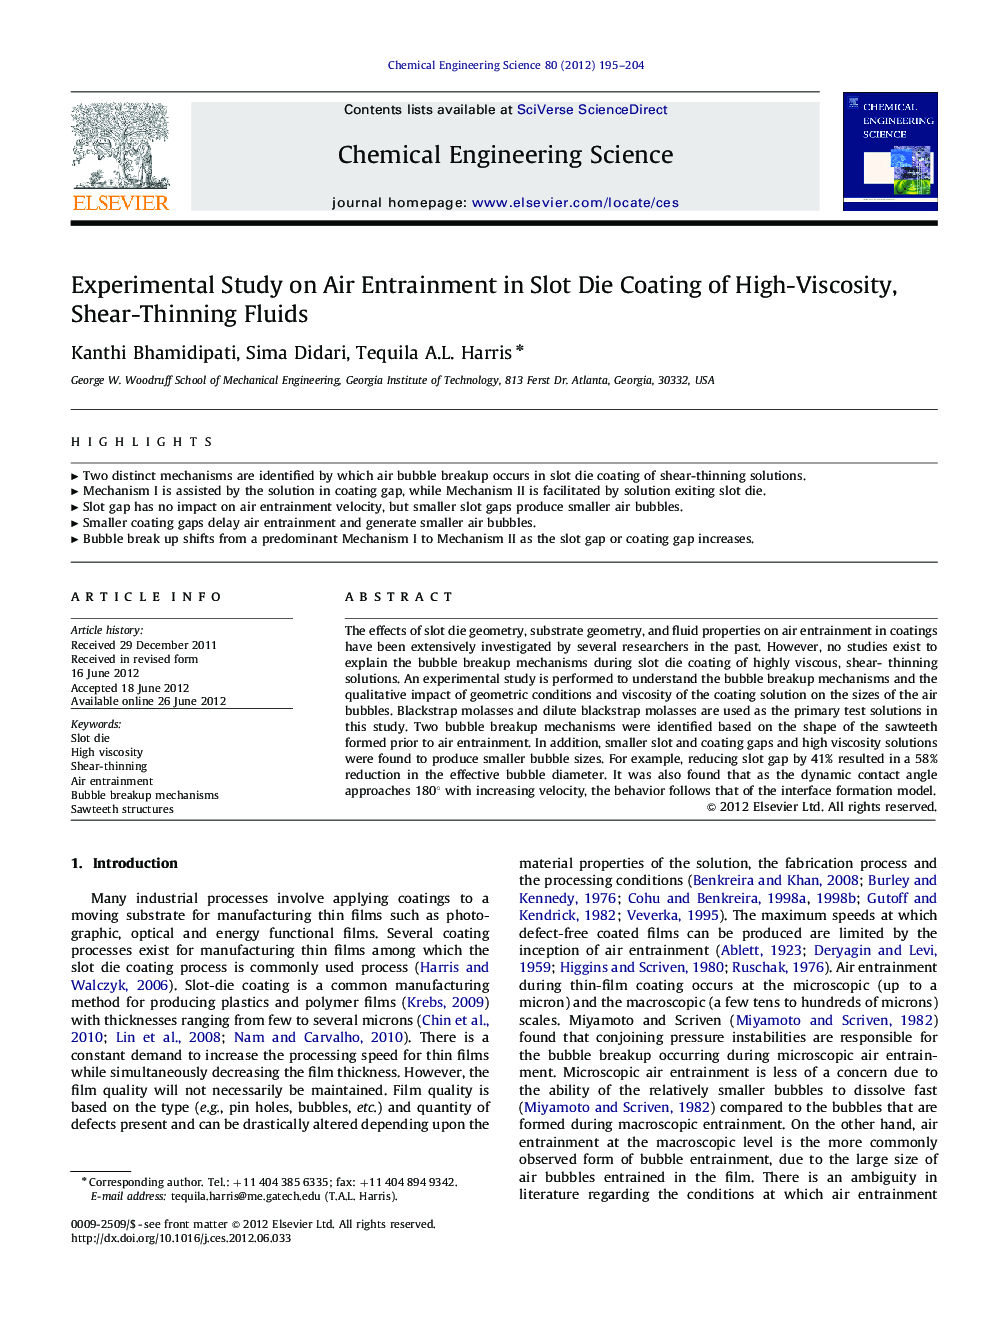 Experimental Study on Air Entrainment in Slot Die Coating of High-Viscosity, Shear-Thinning Fluids